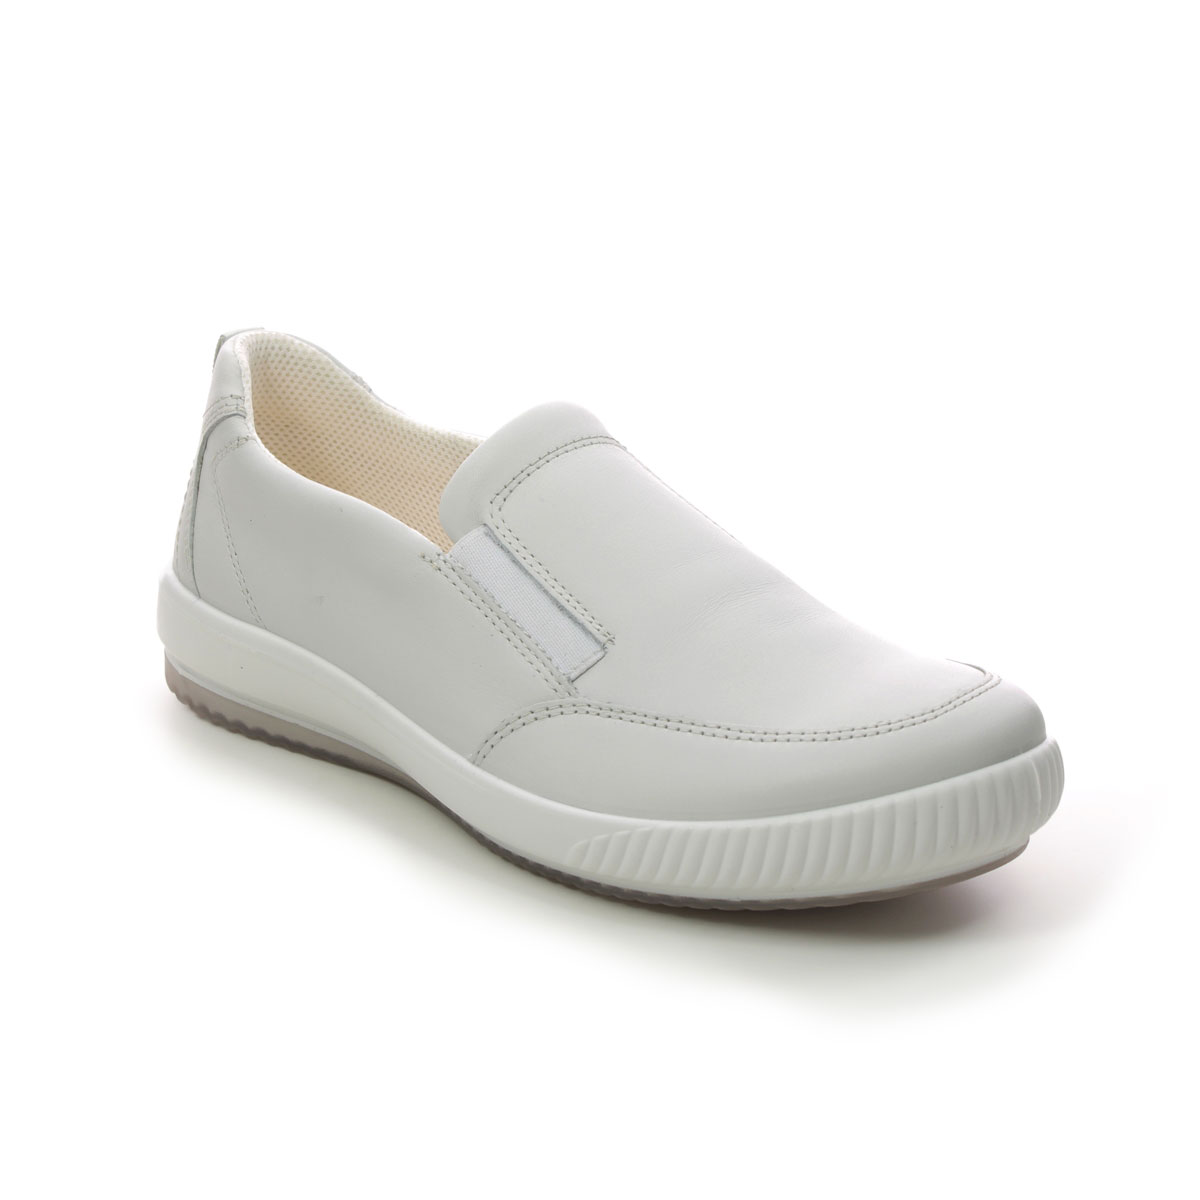 Legero Tanaro 5 Slip White Leather Womens Comfort Slip On Shoes 2000215-1000 In Size 5 In Plain White Leather